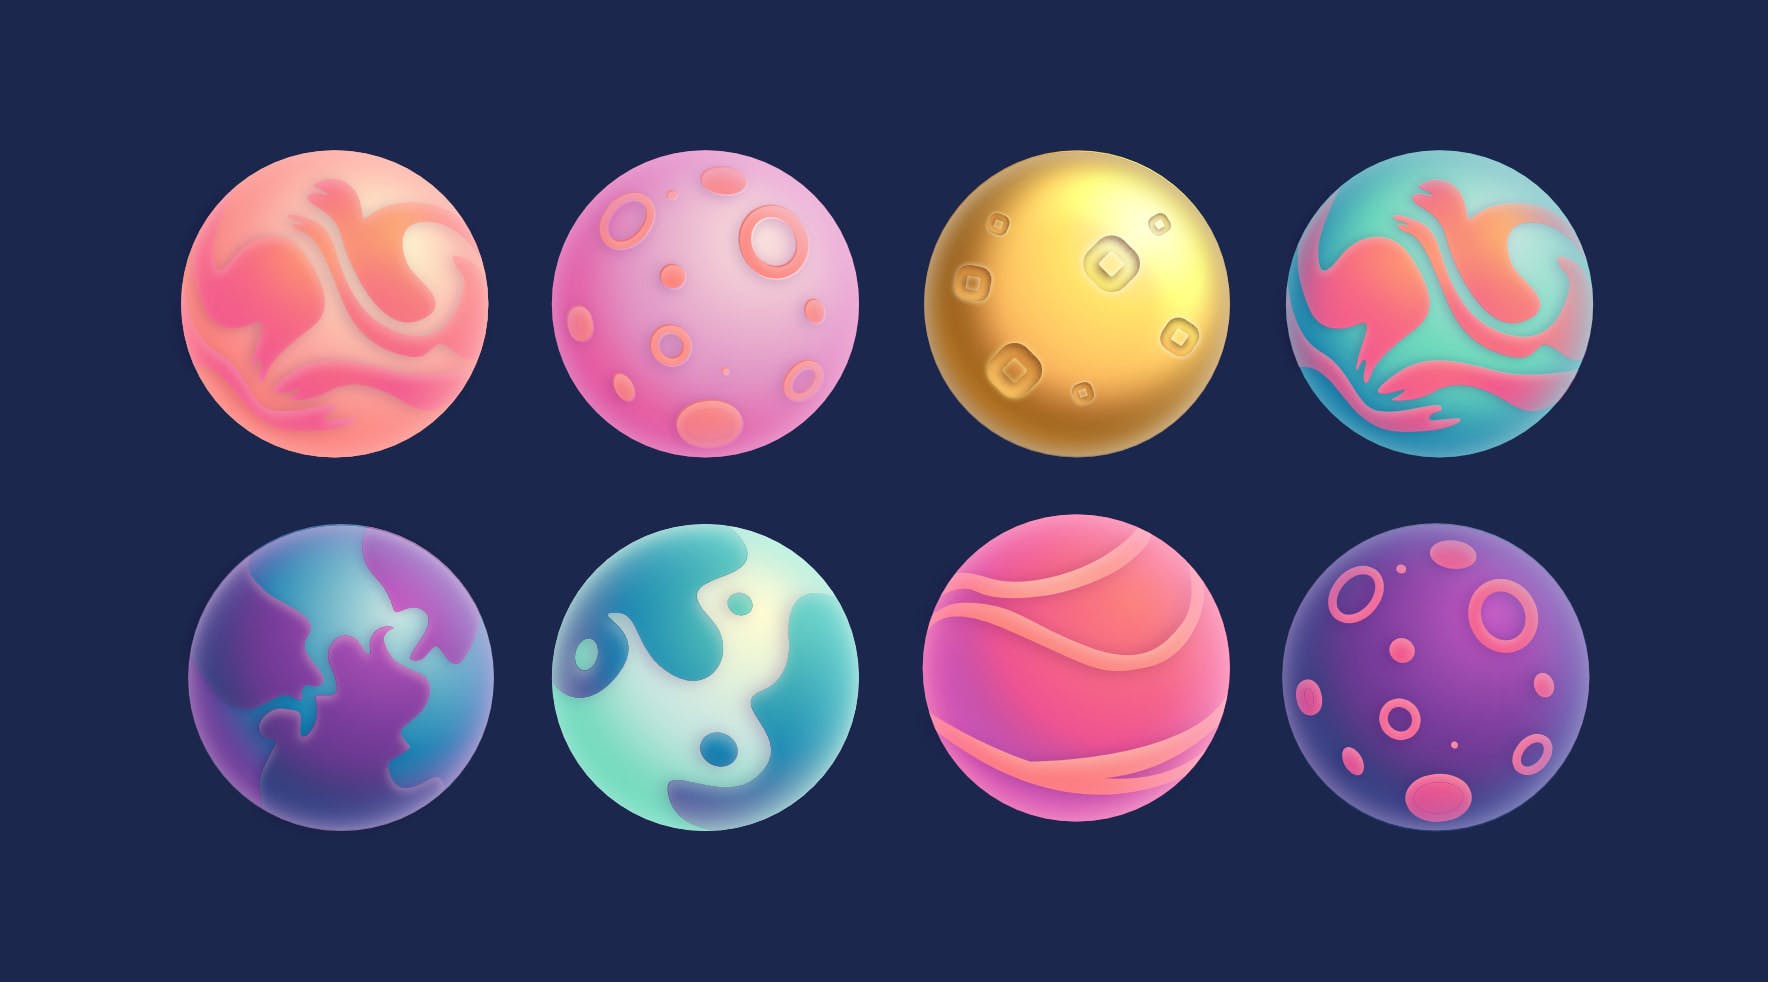 planet illustrations from the game art